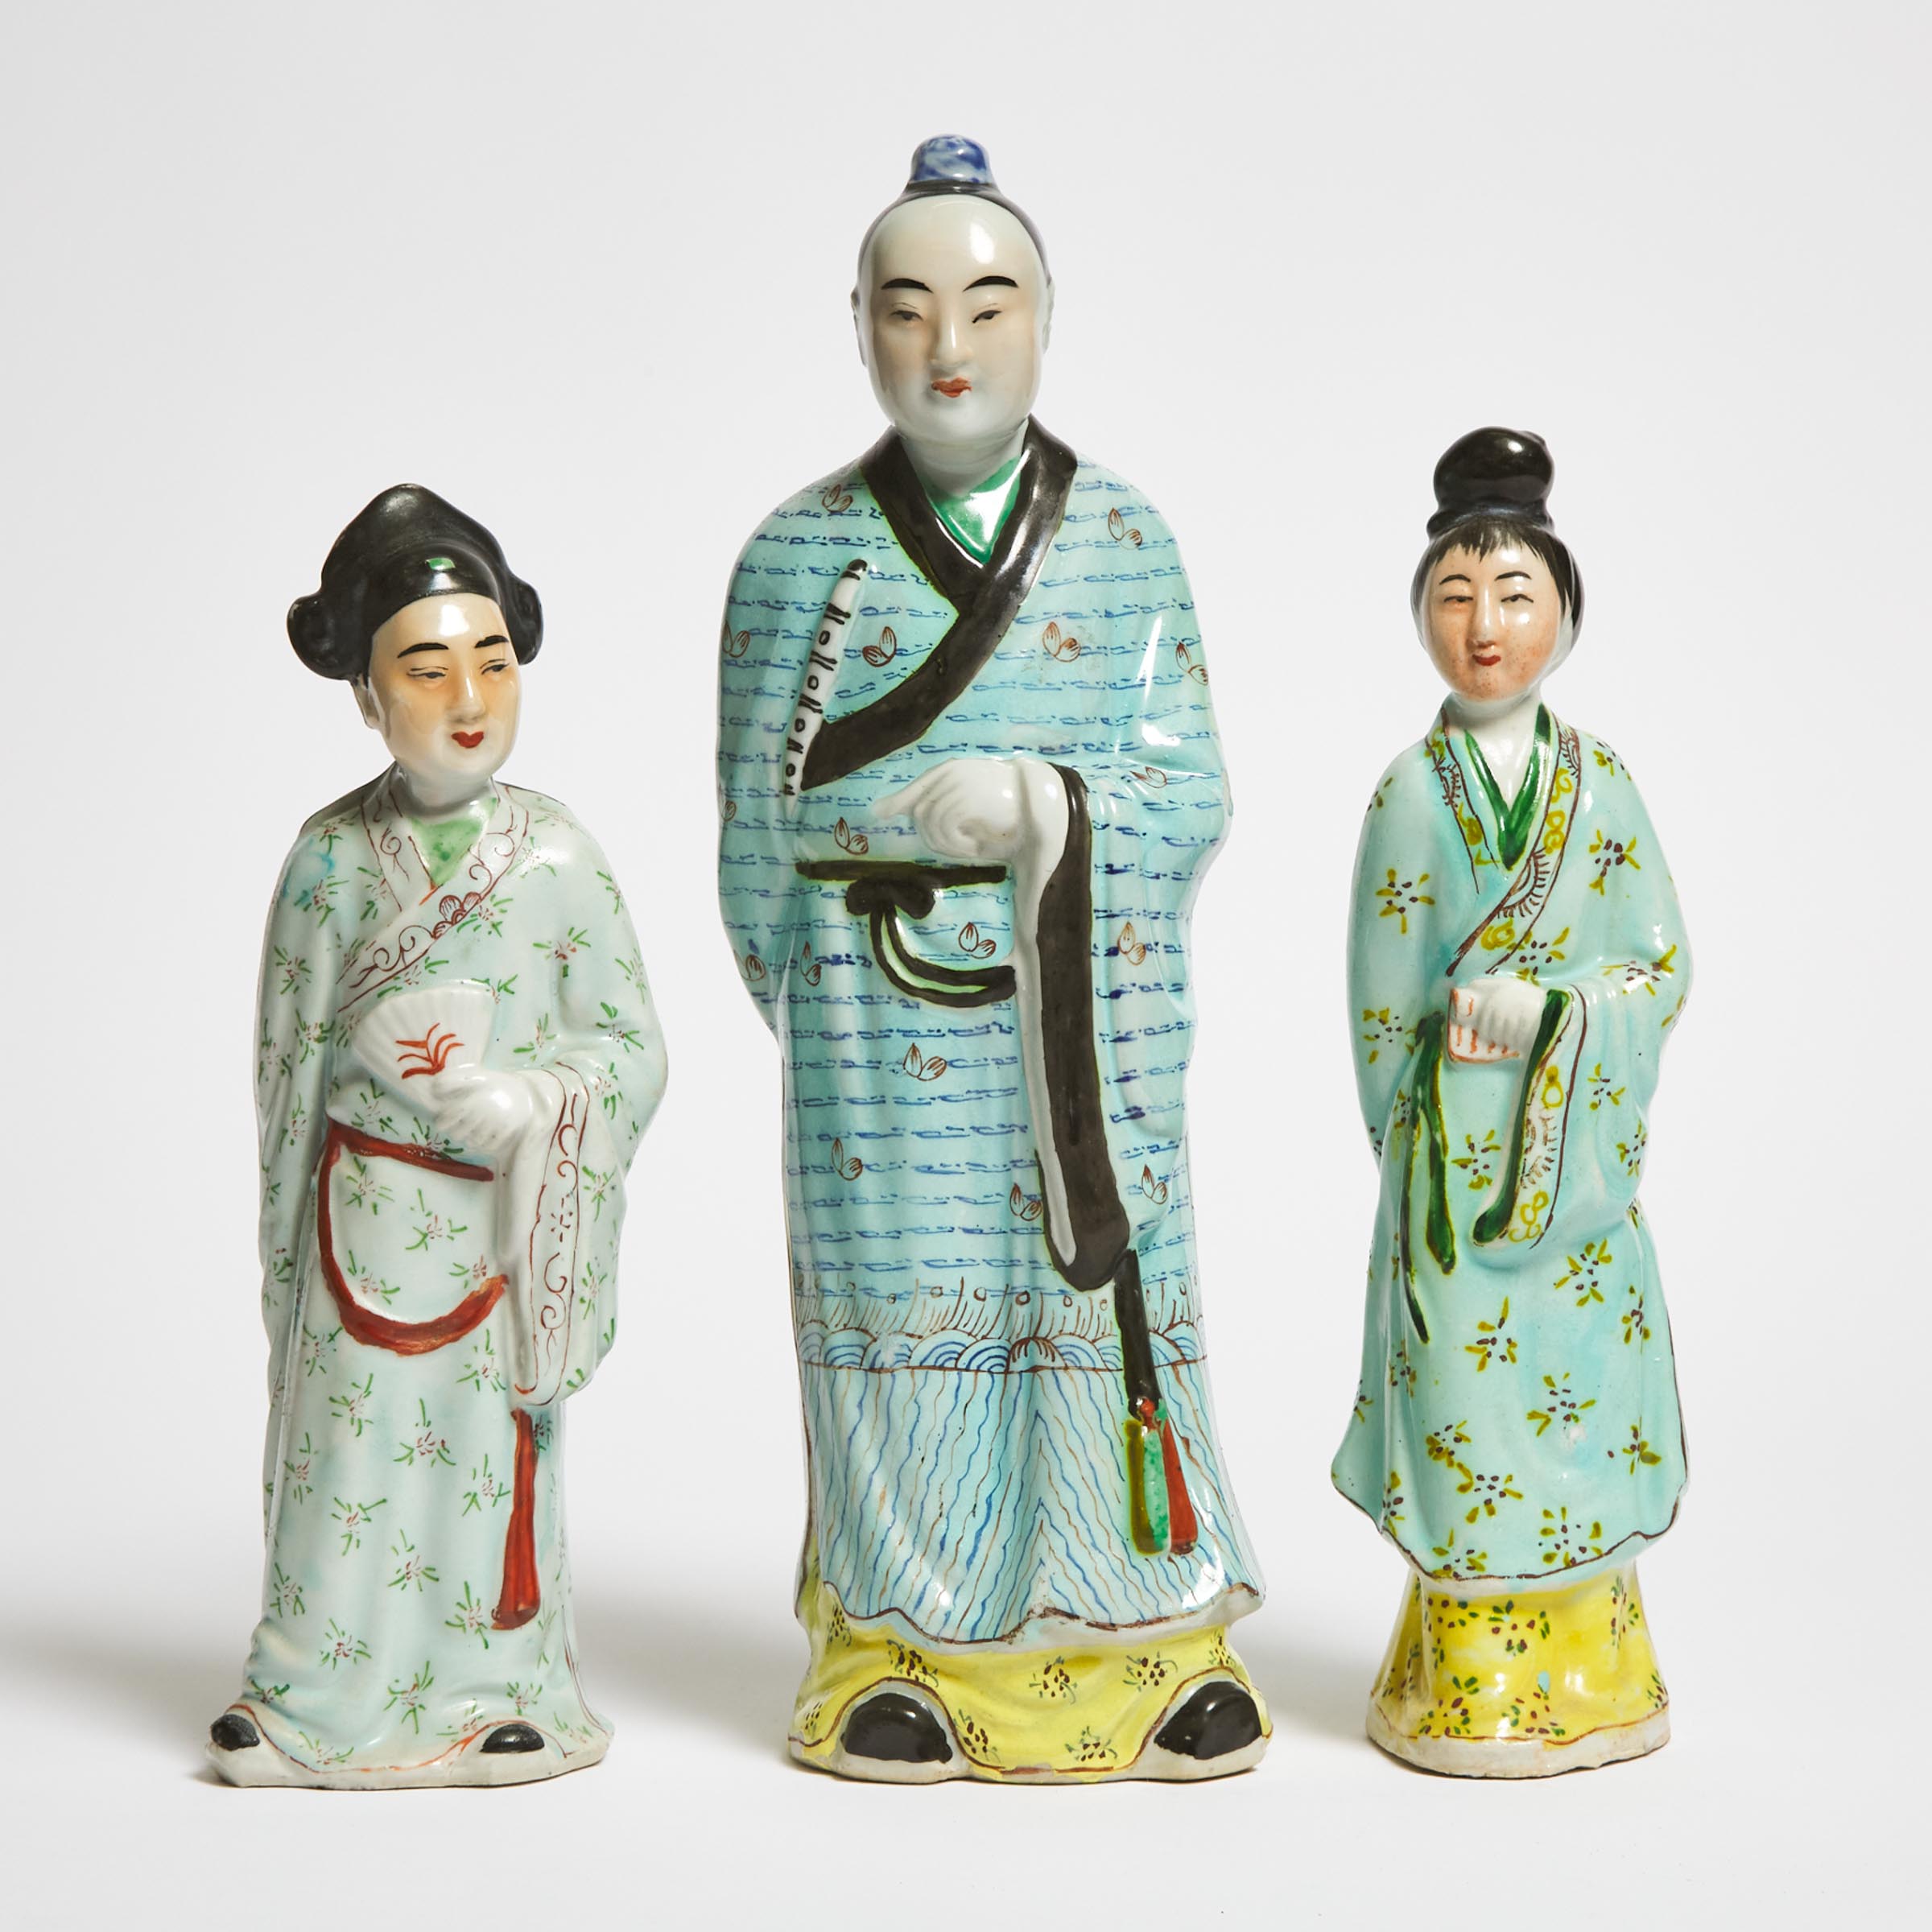 A Group of Three Enameled Porcelain Figures, Republican Period (1912-1949)